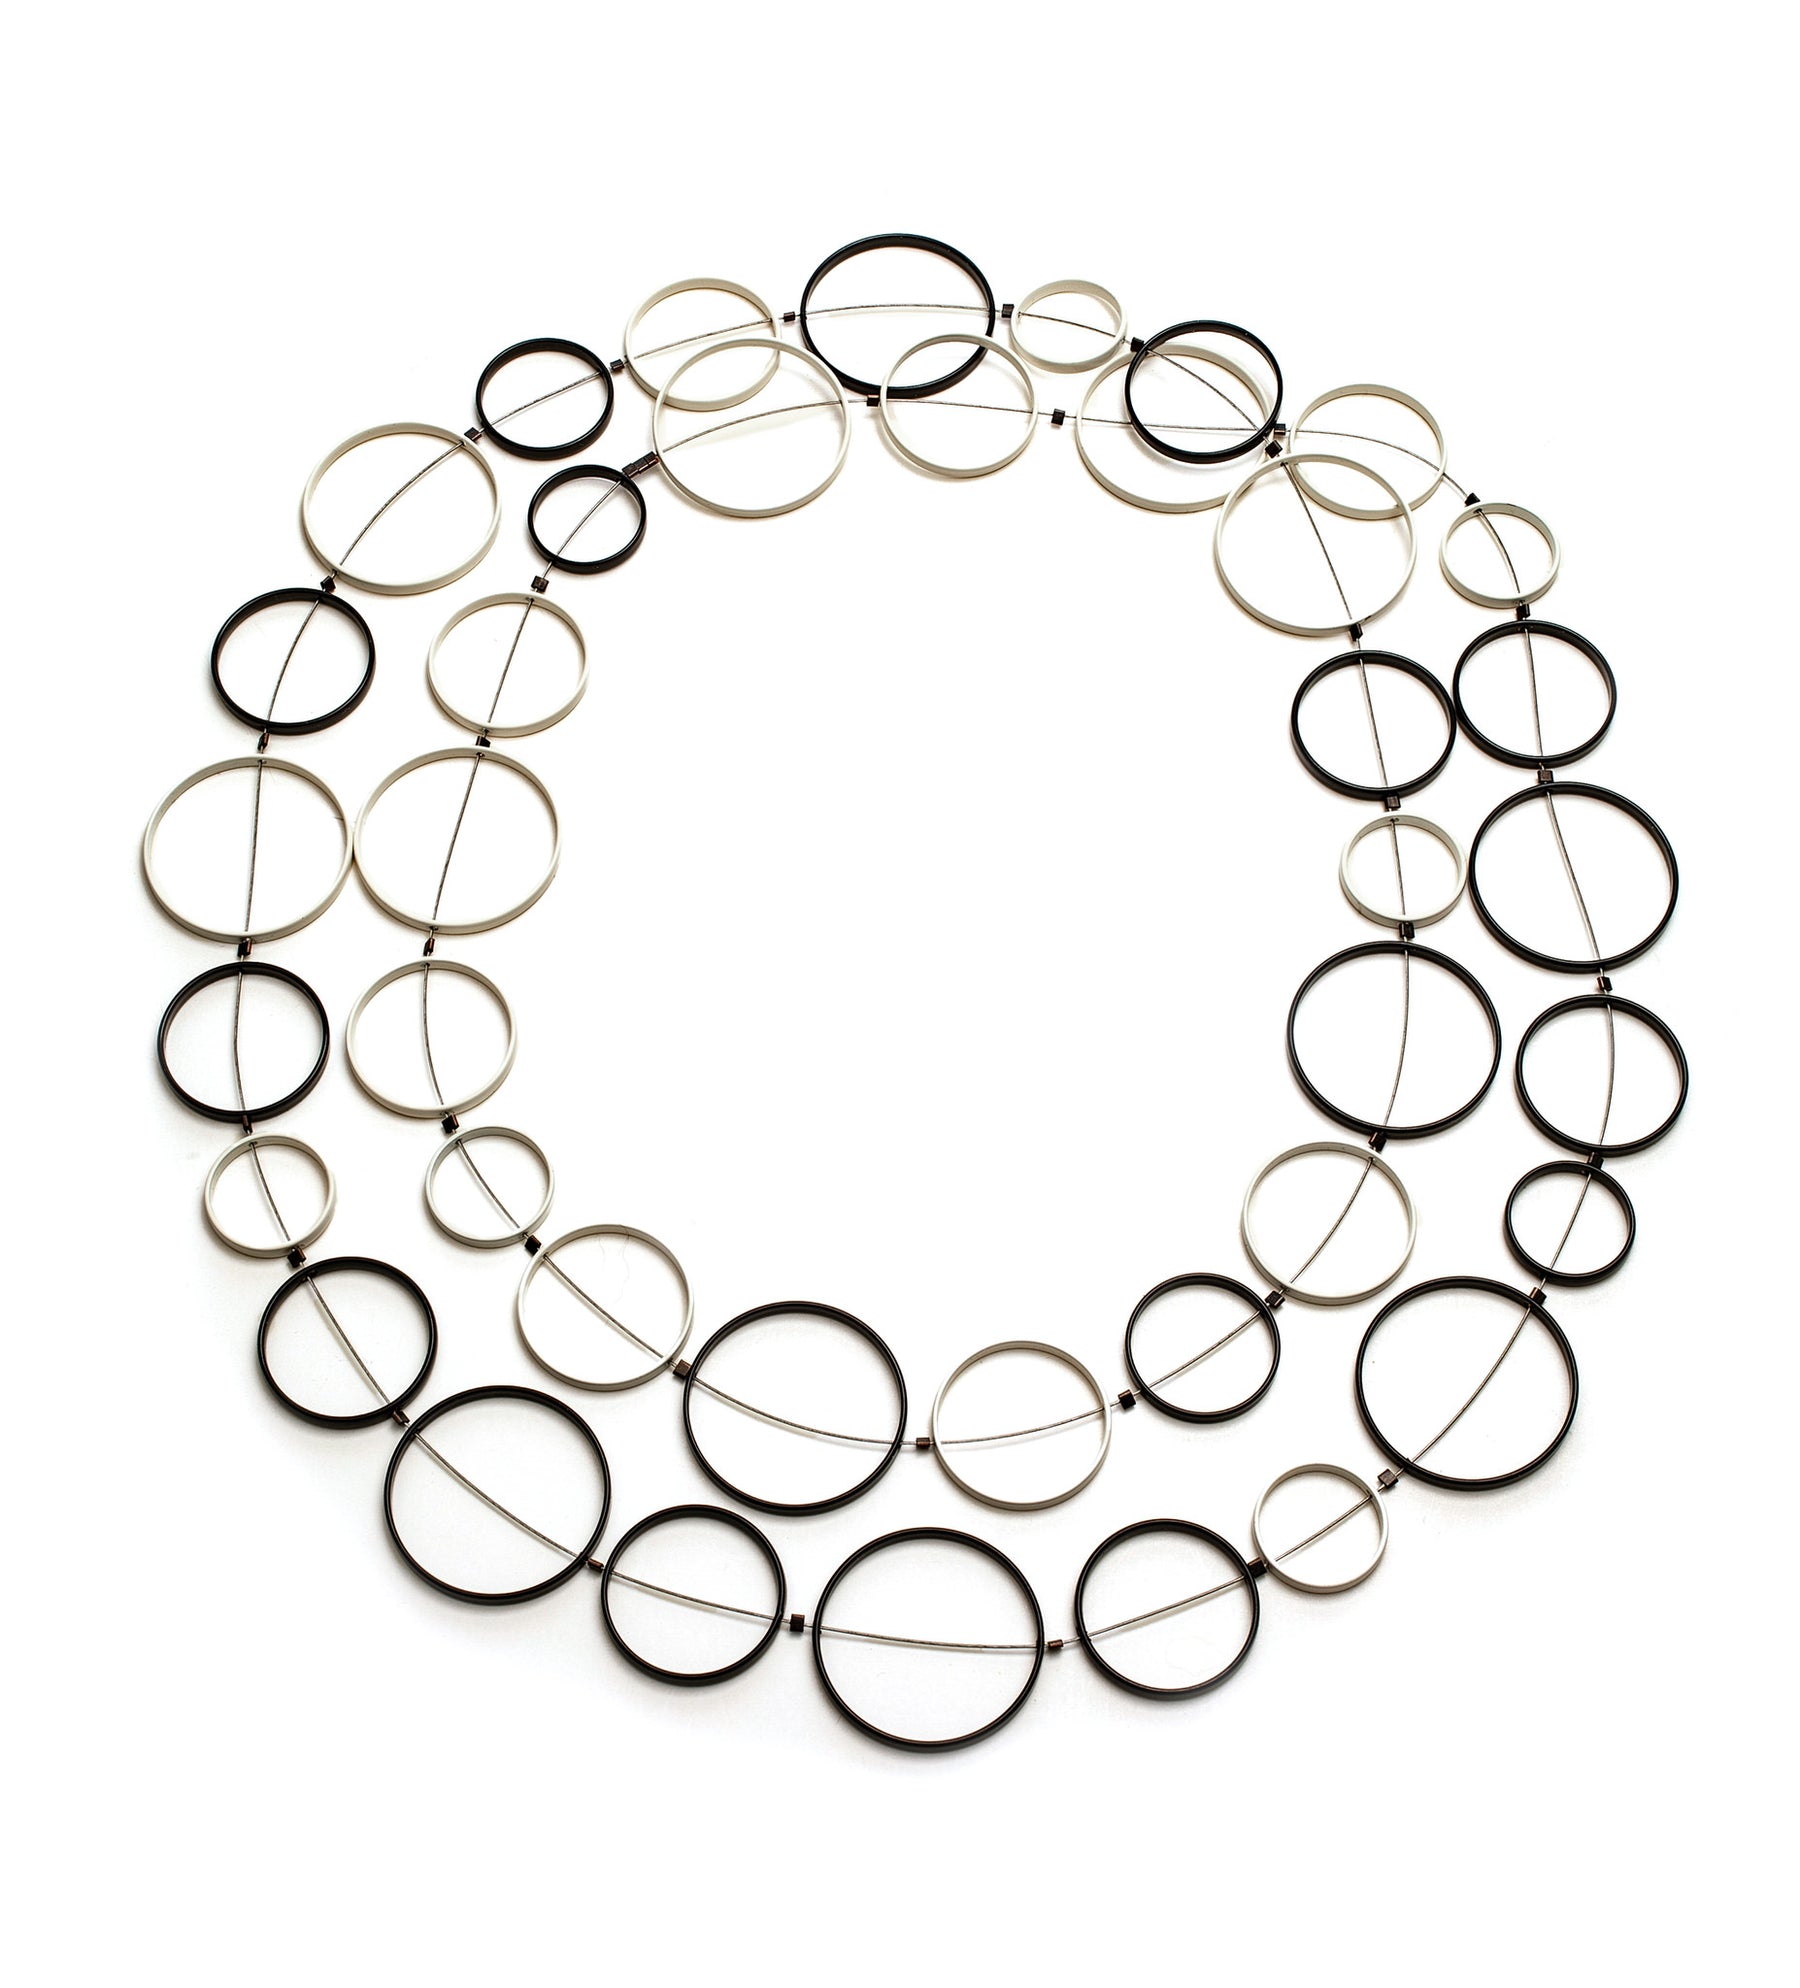 Black and White Circle Necklace 48"